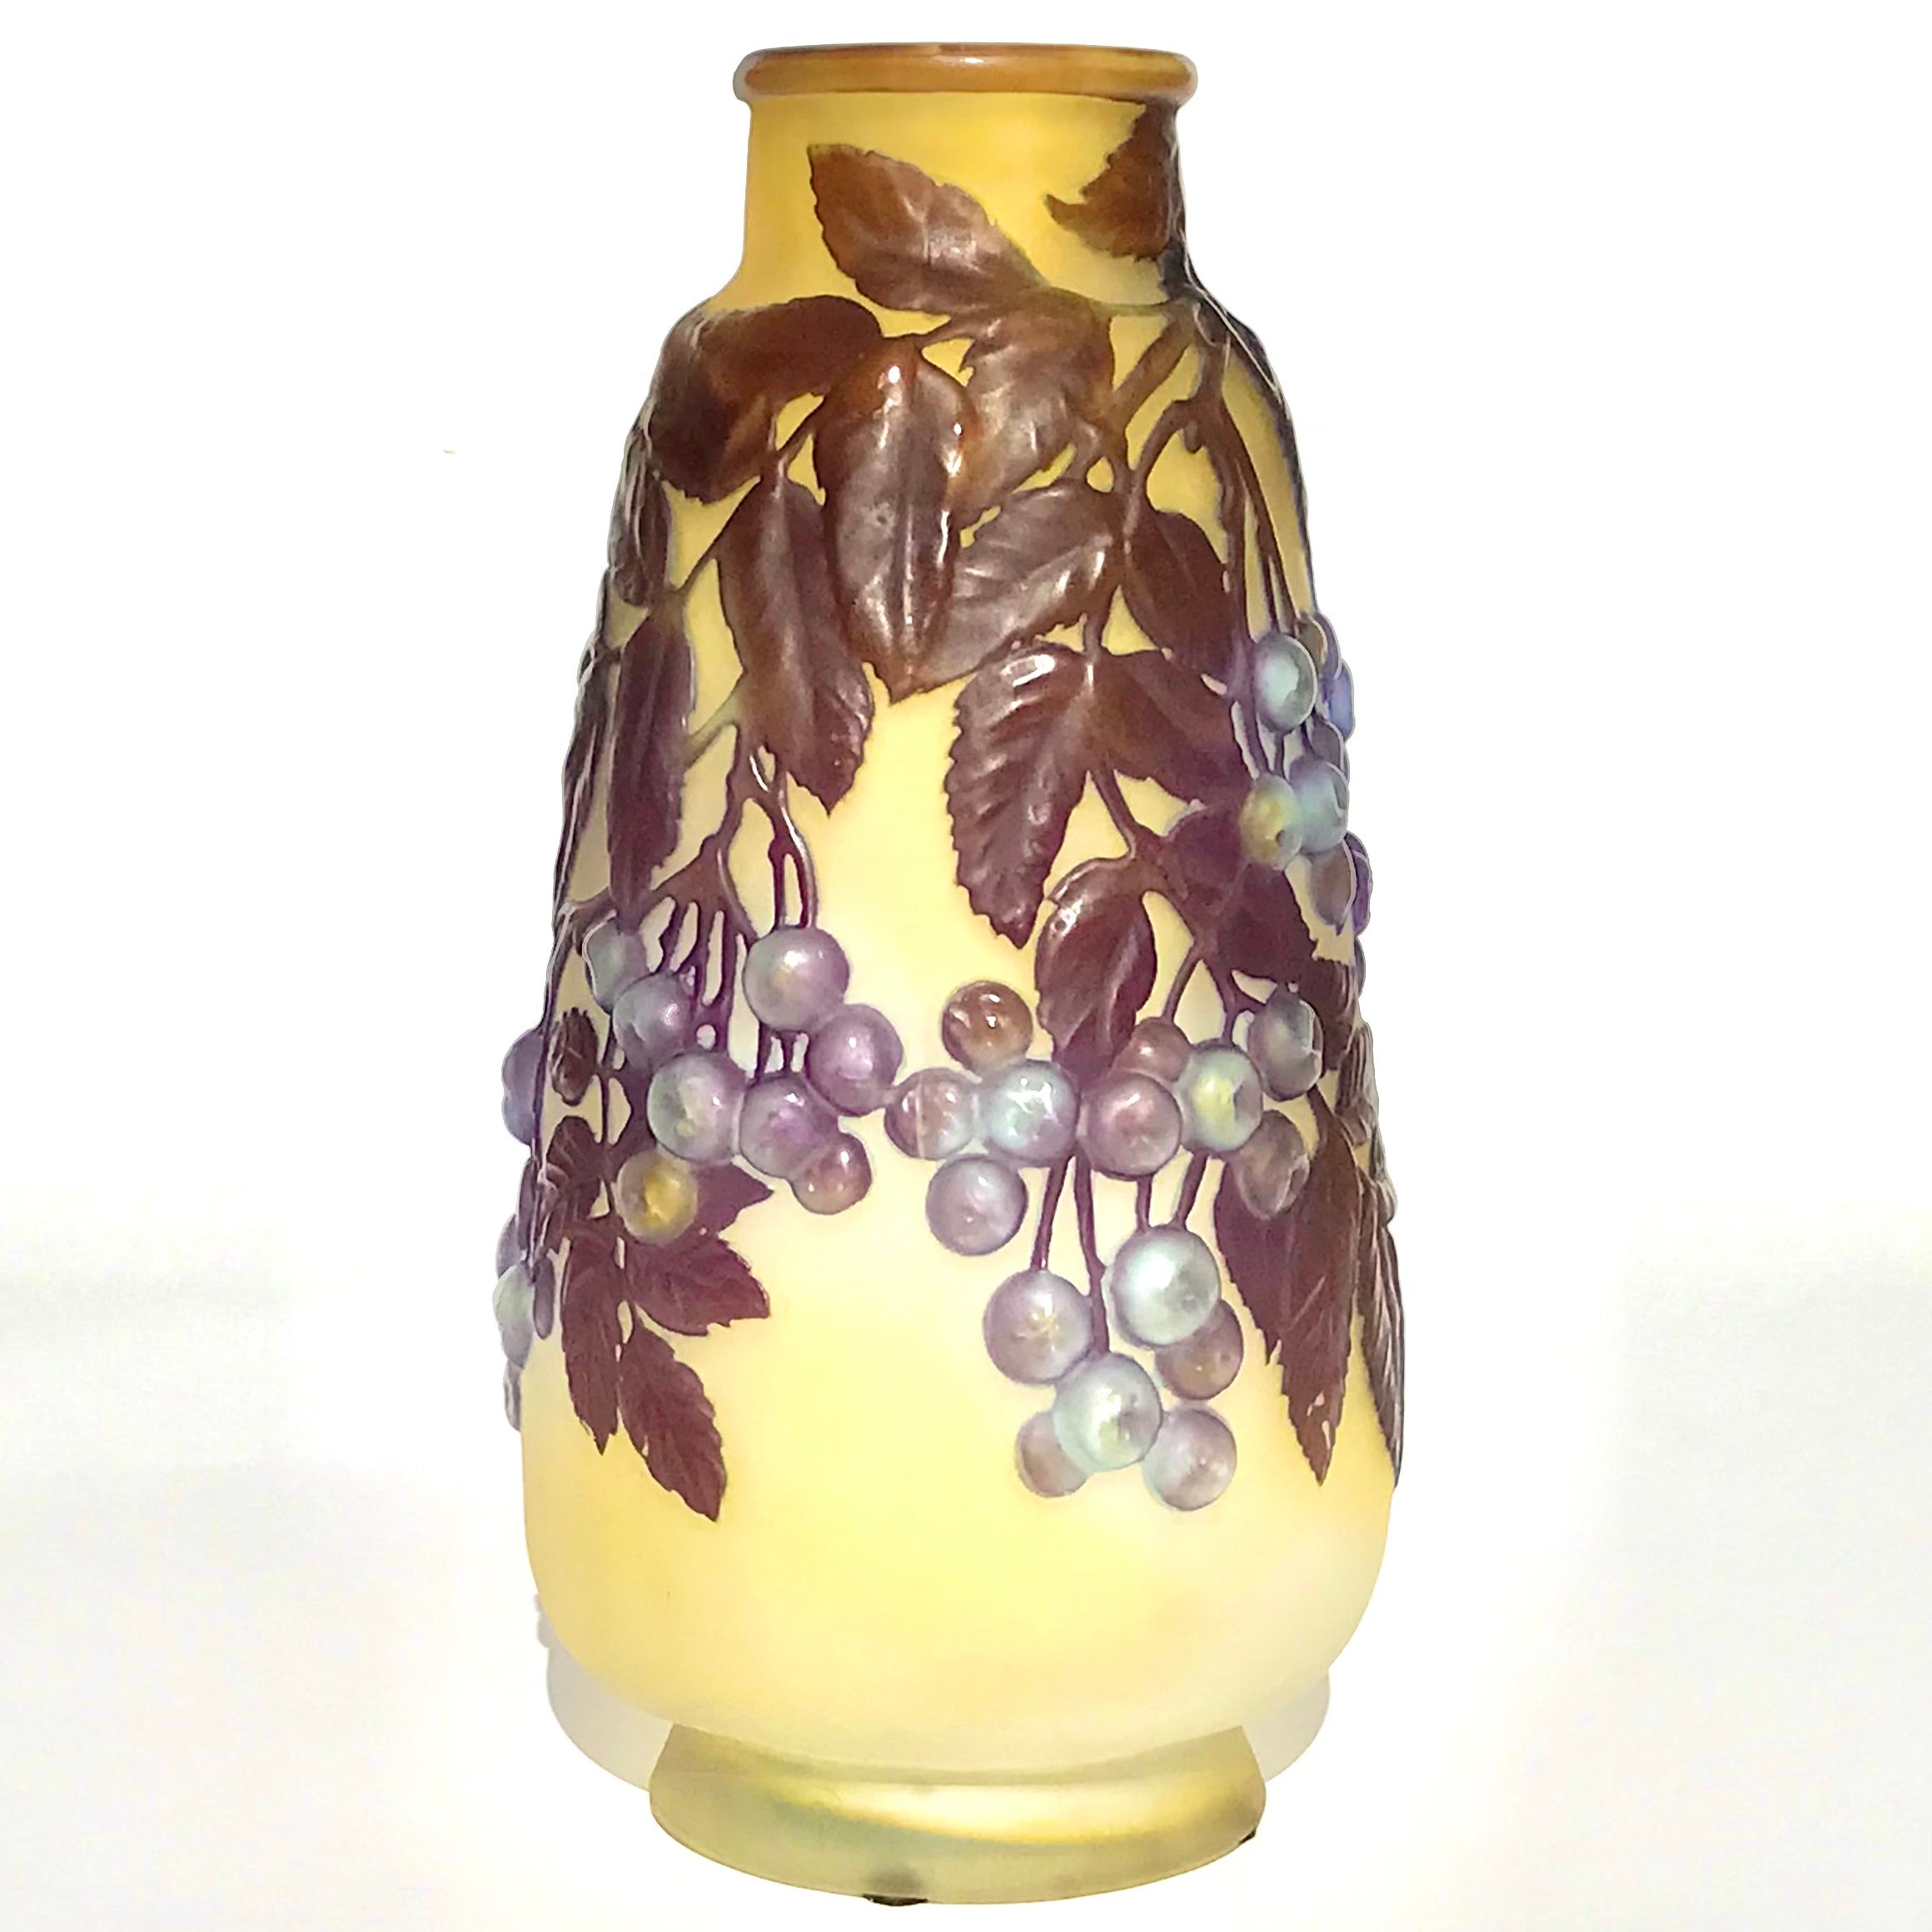 Emile Galle (French 1846 -1904) Soufflé Cameo Vase

Large Emile Gallé Mold-Blown Cameo Glass Berries Vase, circa 1910 Yellow and cream background with mold blown soufflé blue berries on branches with purple leaves acid etched in cameo. A rather